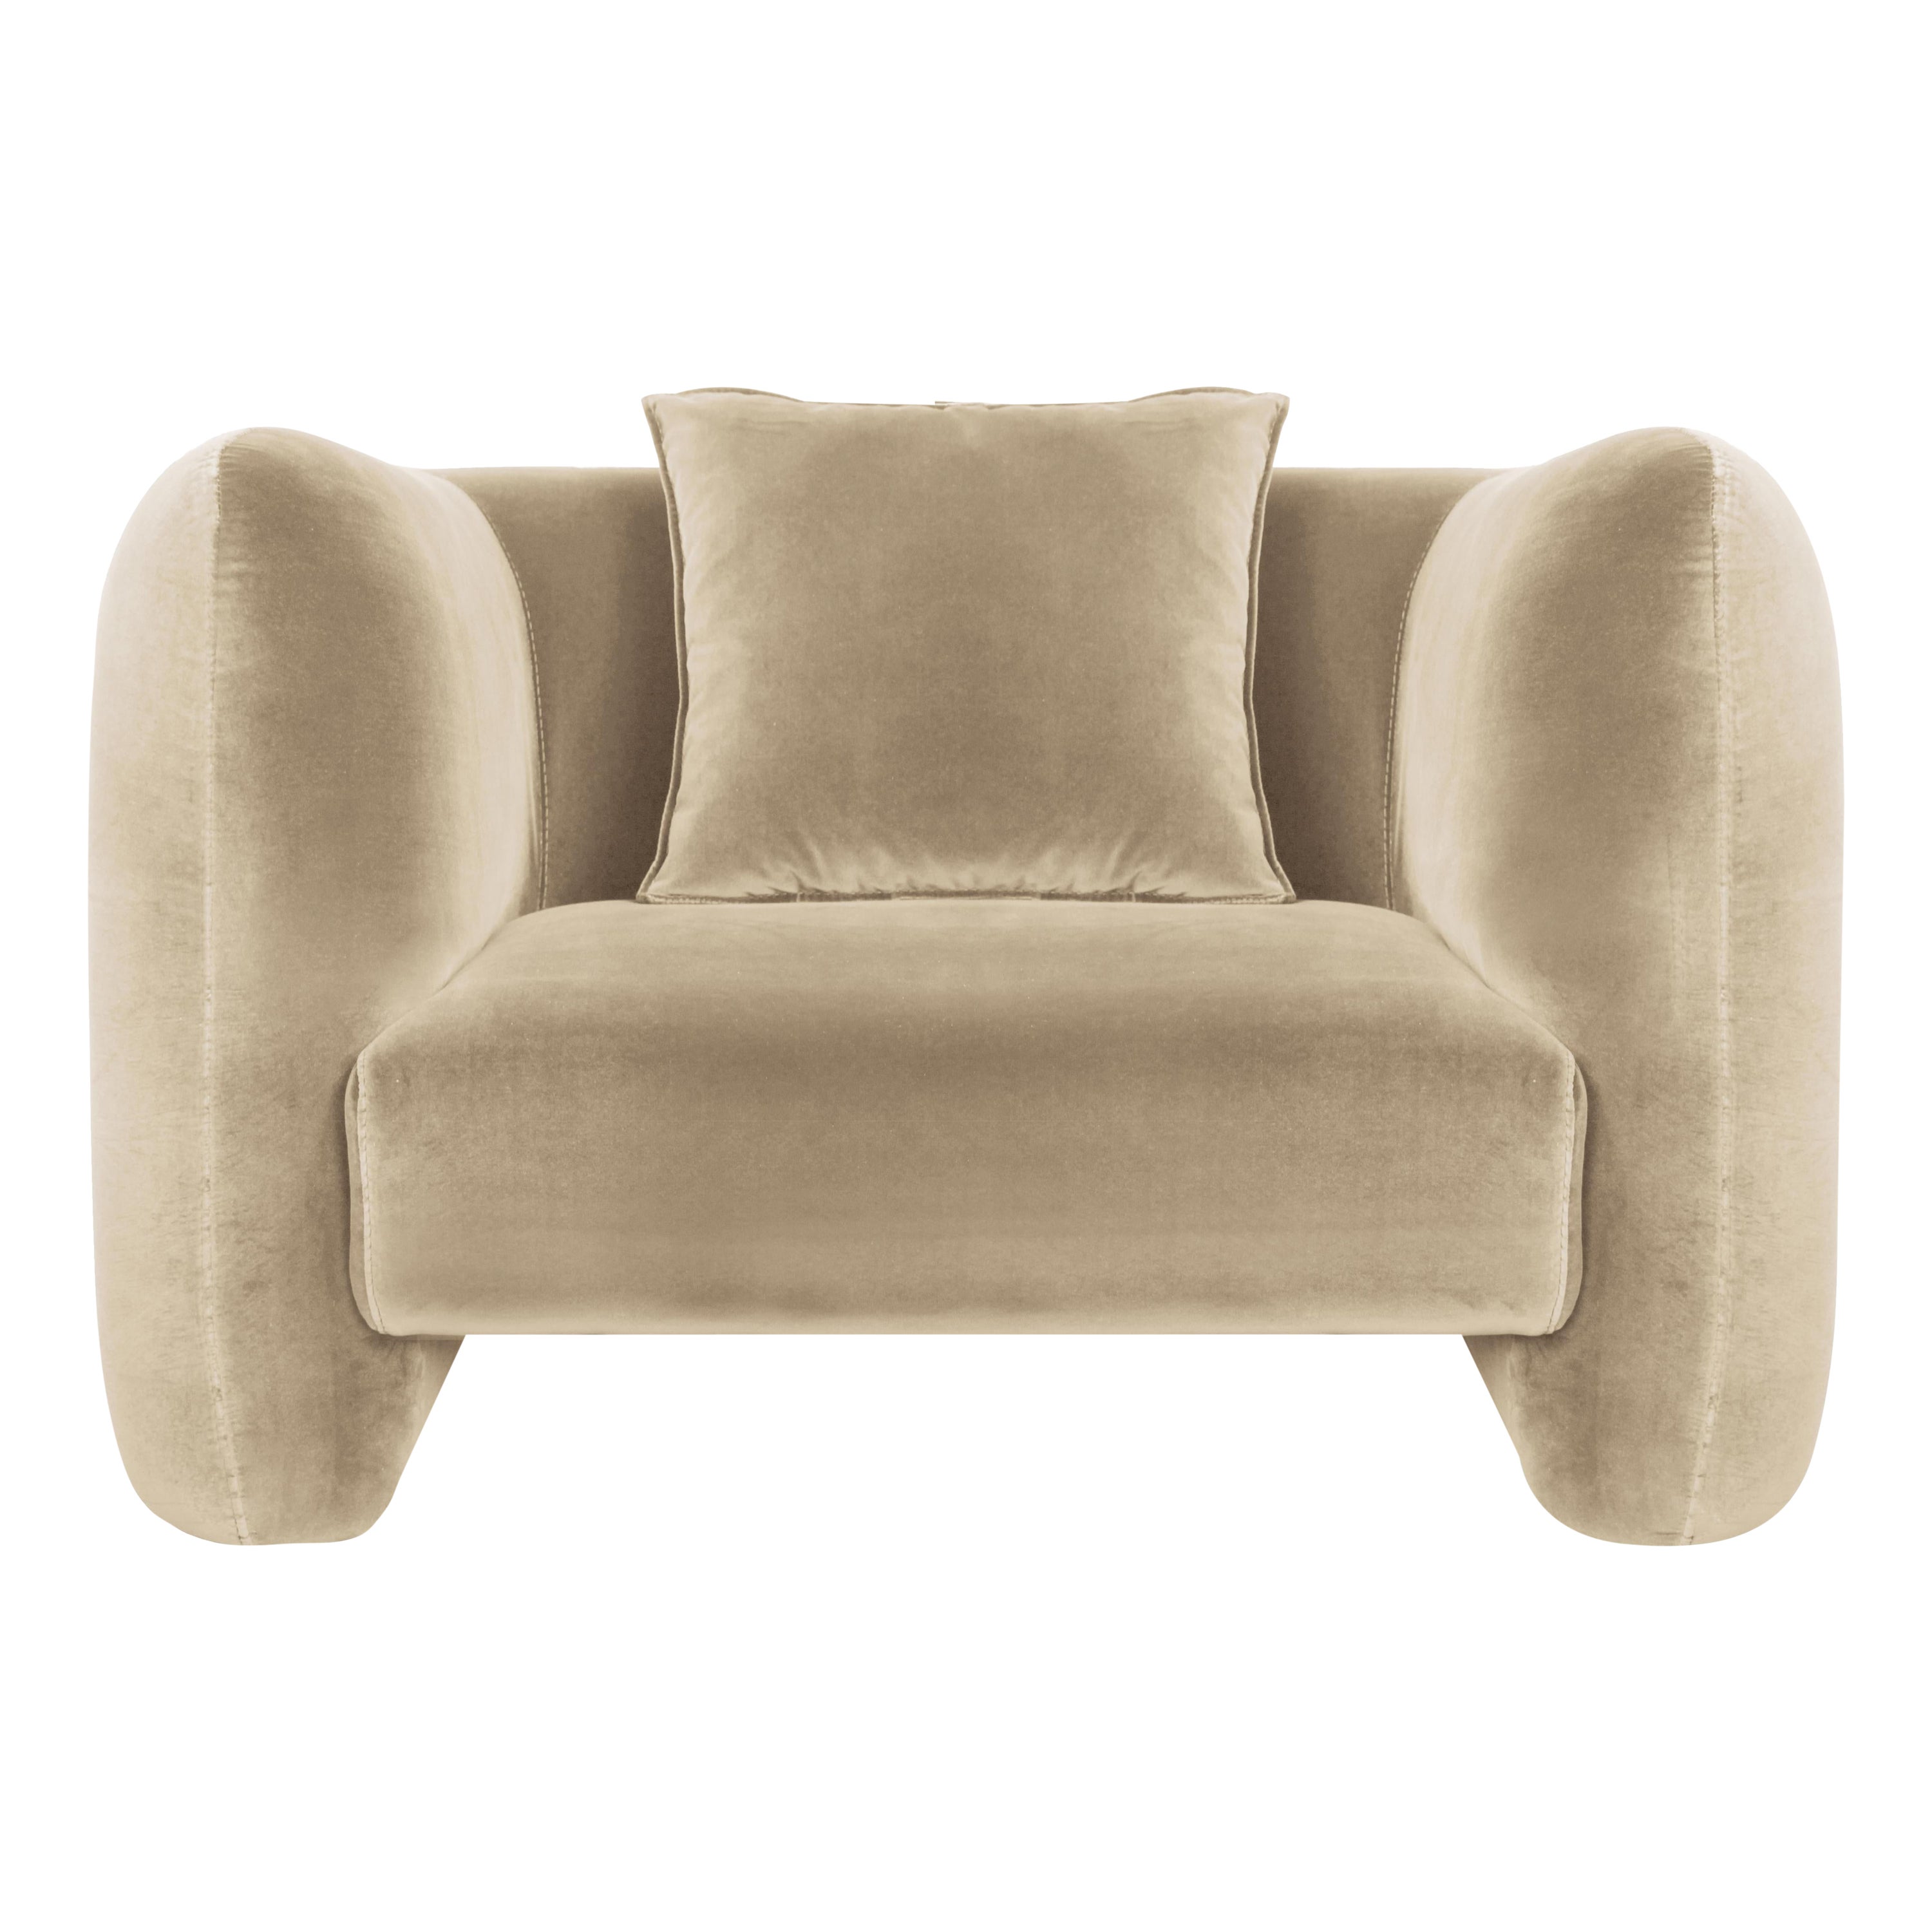 Contemporary Modern Jacob Armchair in Beige Fabric by Collector Studio